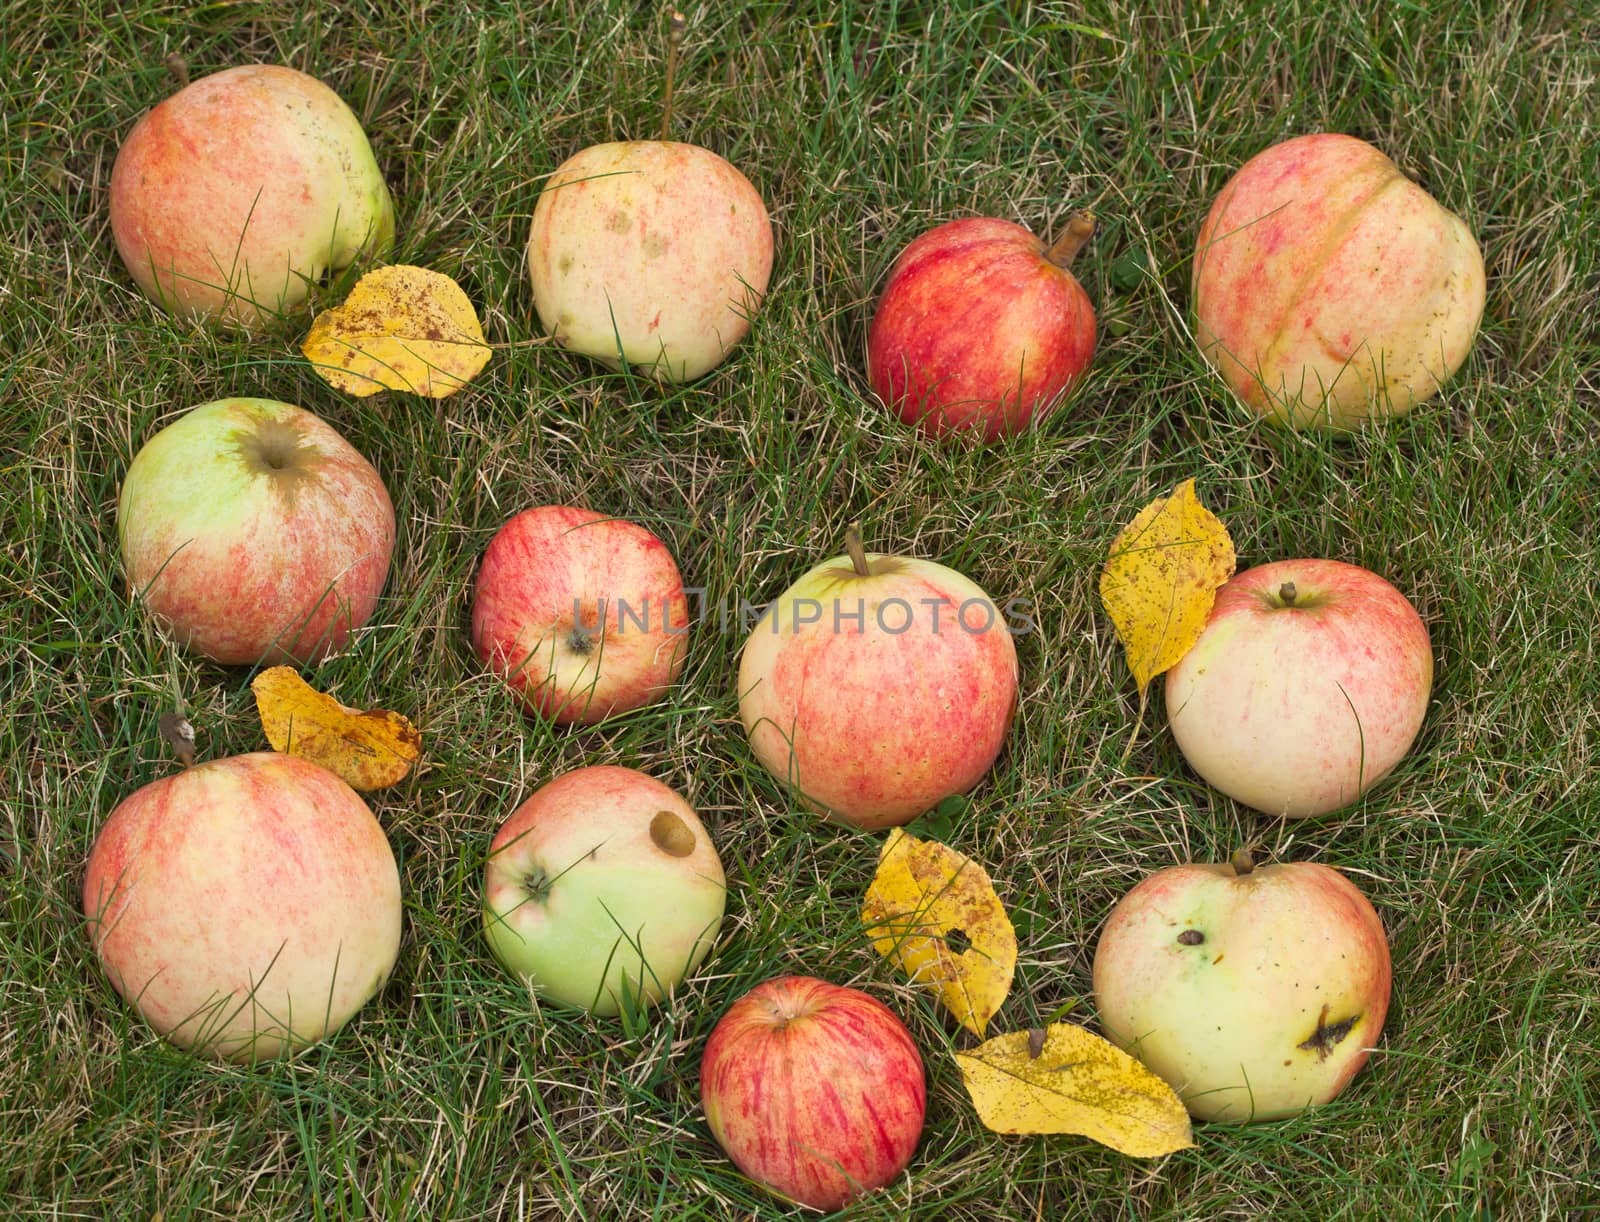 Red-ripe apples on the grass